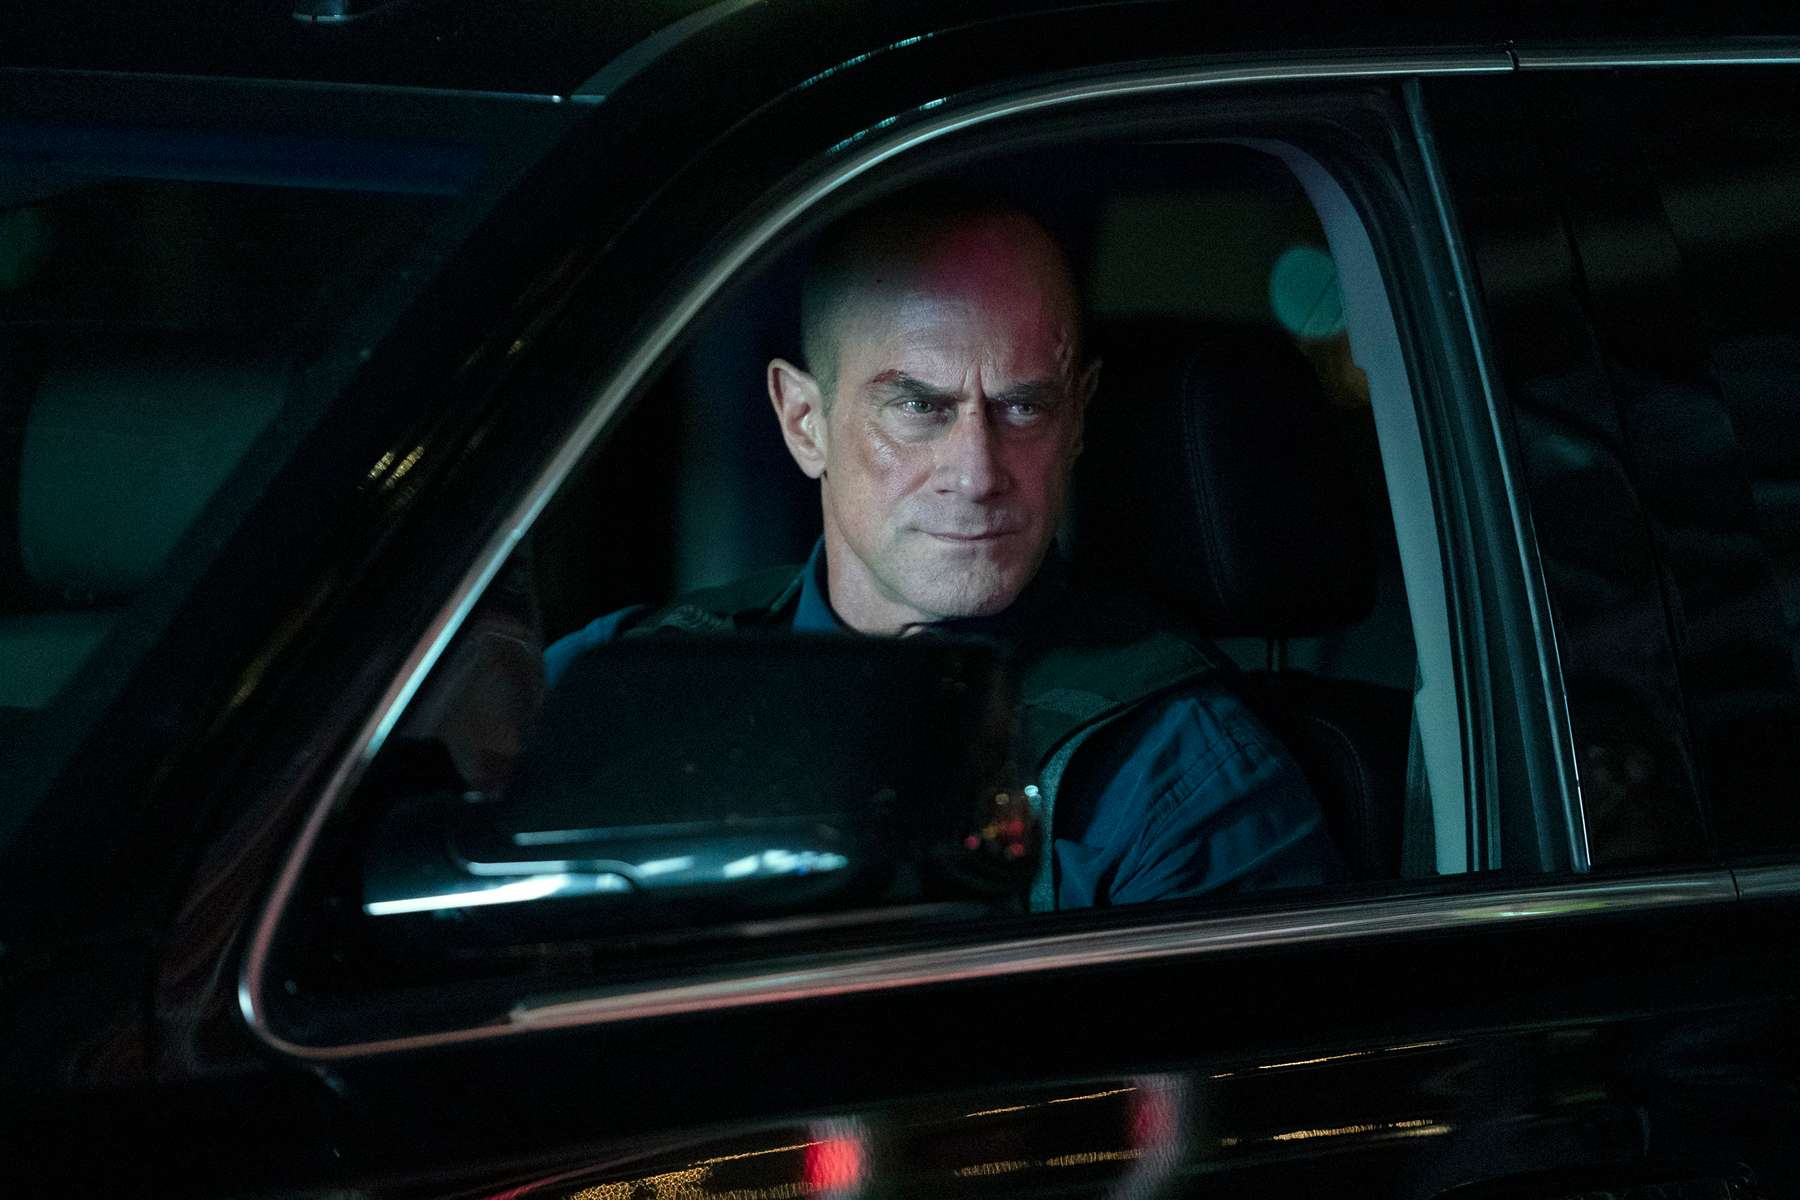 LAW & ORDER: ORGANIZED CRIME -- {quote}Say Hello To My Little Friend{quote} Episode 103 -- Pictured: Christopher Meloni as Detective Elliot Stabler -- (Photo by: Heidi Gutman/NBC)